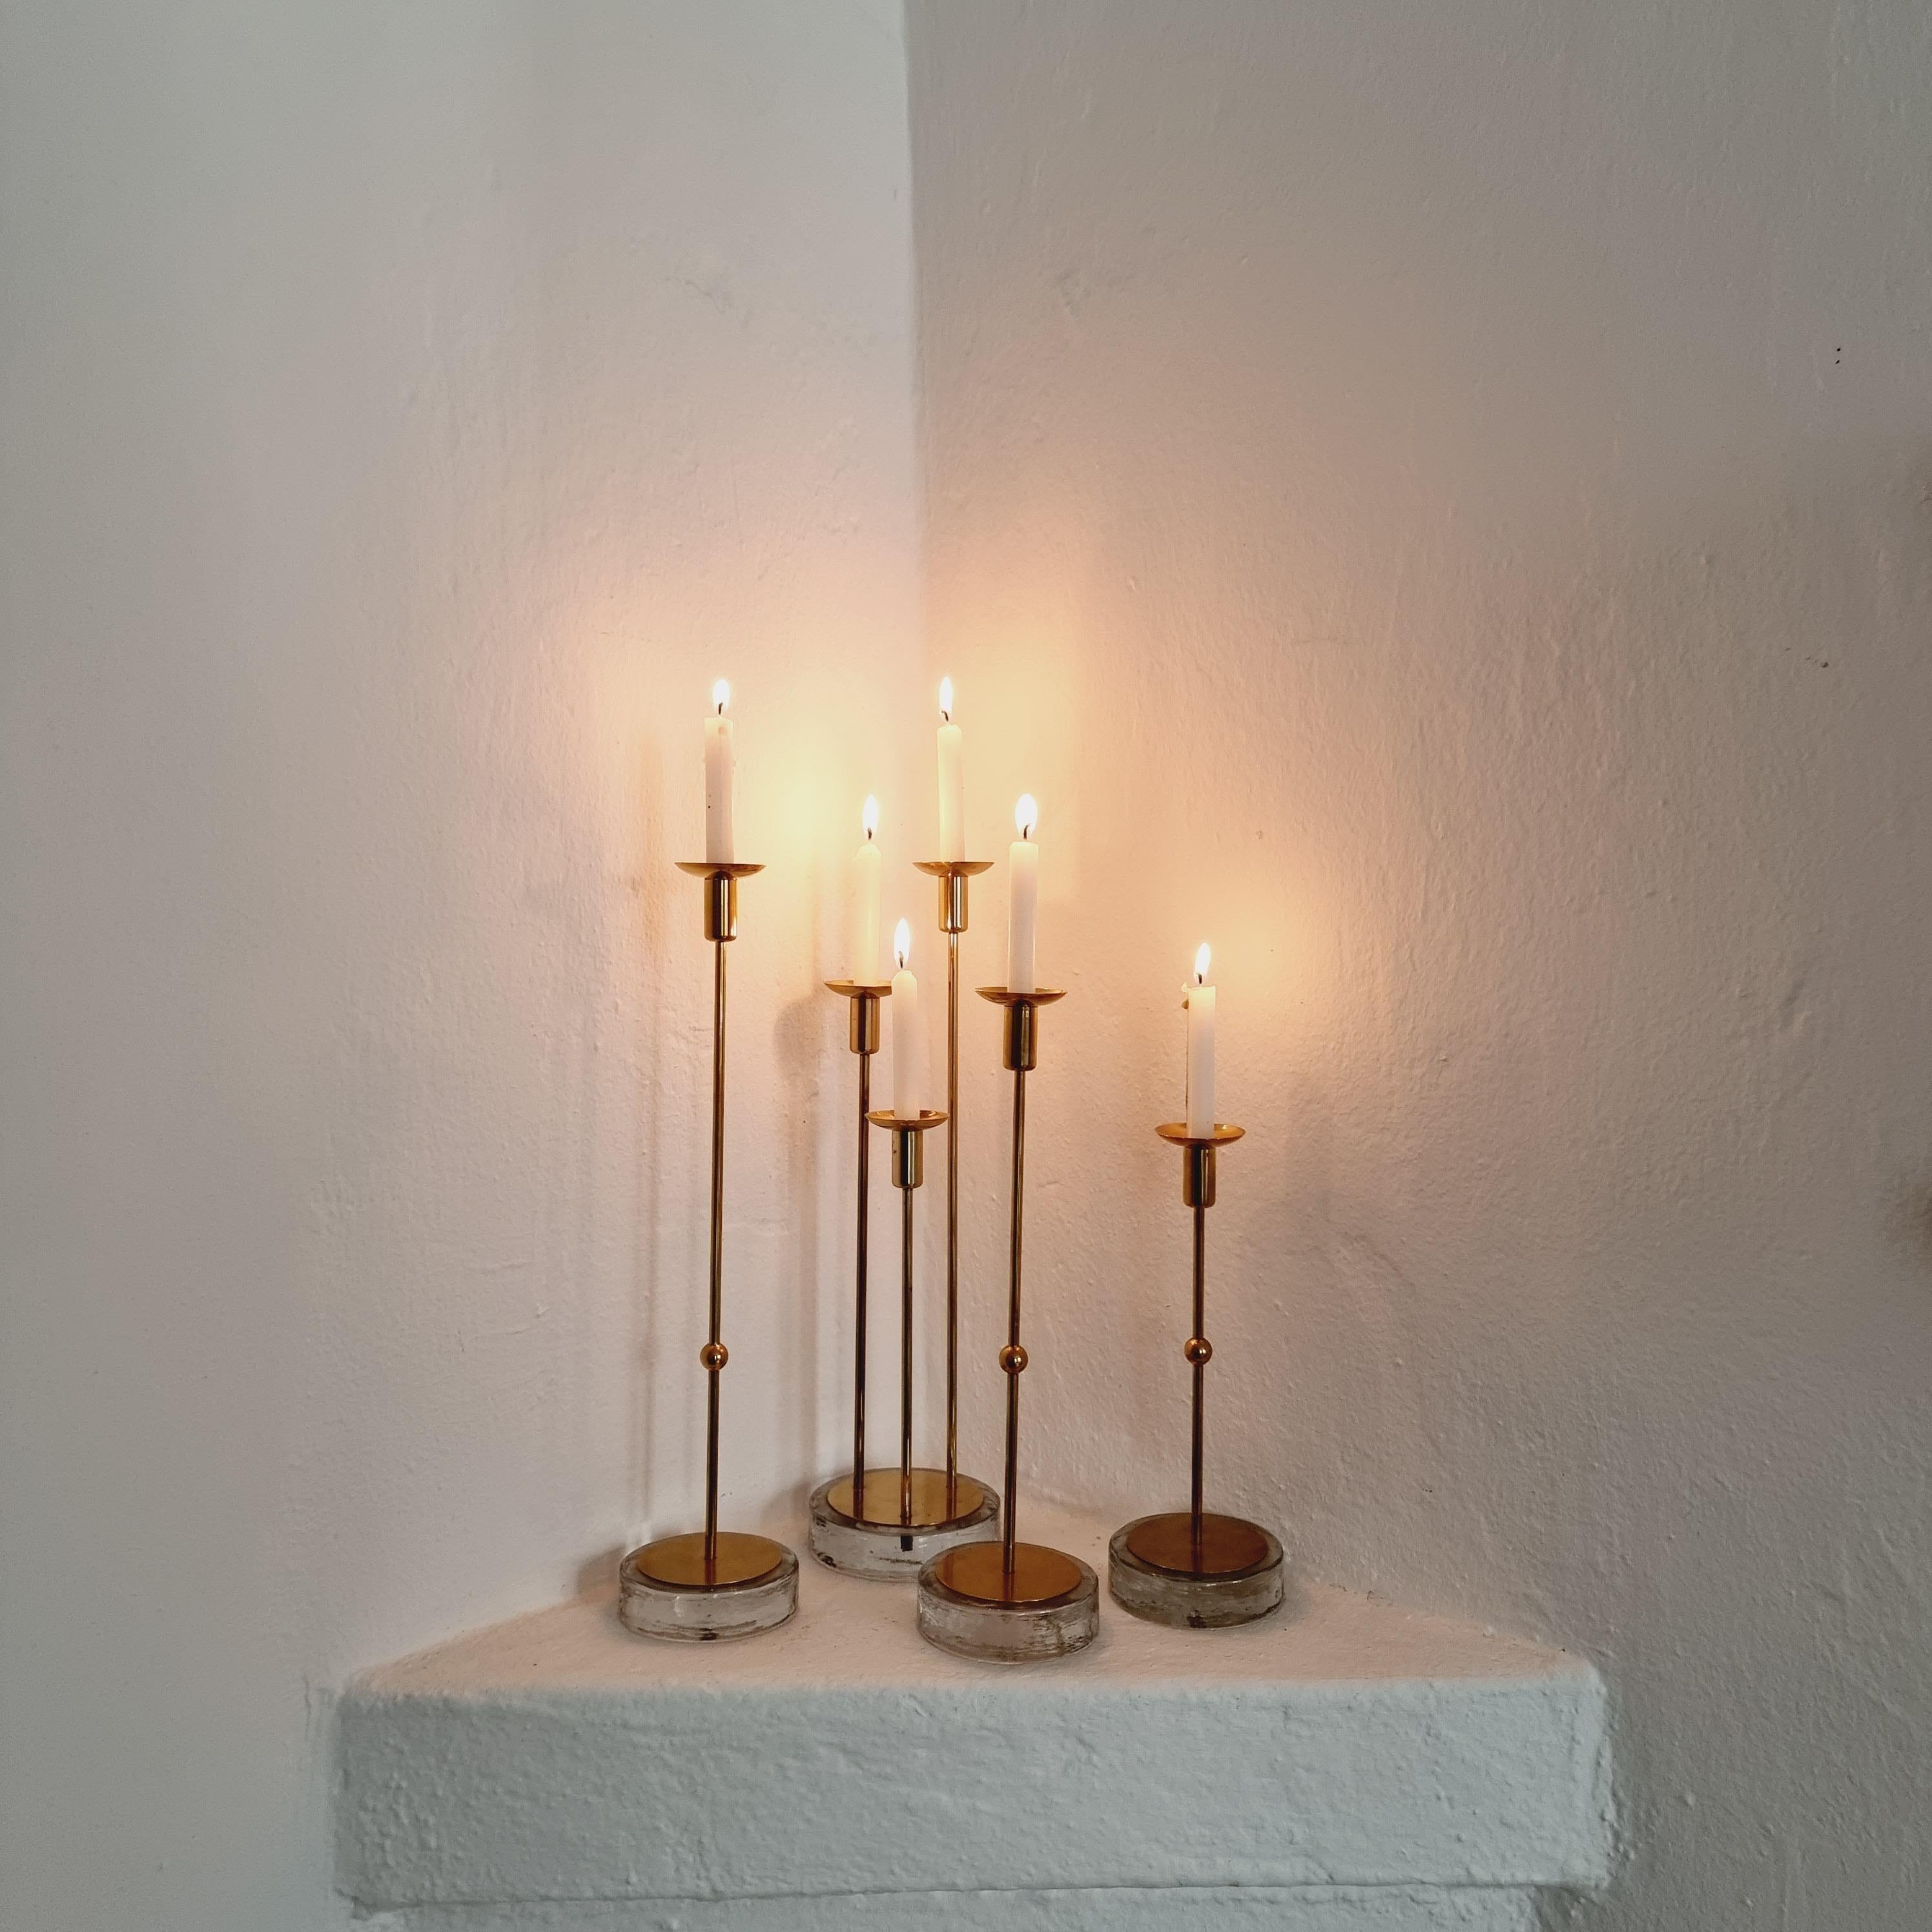 Gunnar Ander, Four Candle Holders, Brass & Glass, Ystad Metall, Swedish Modern For Sale 5